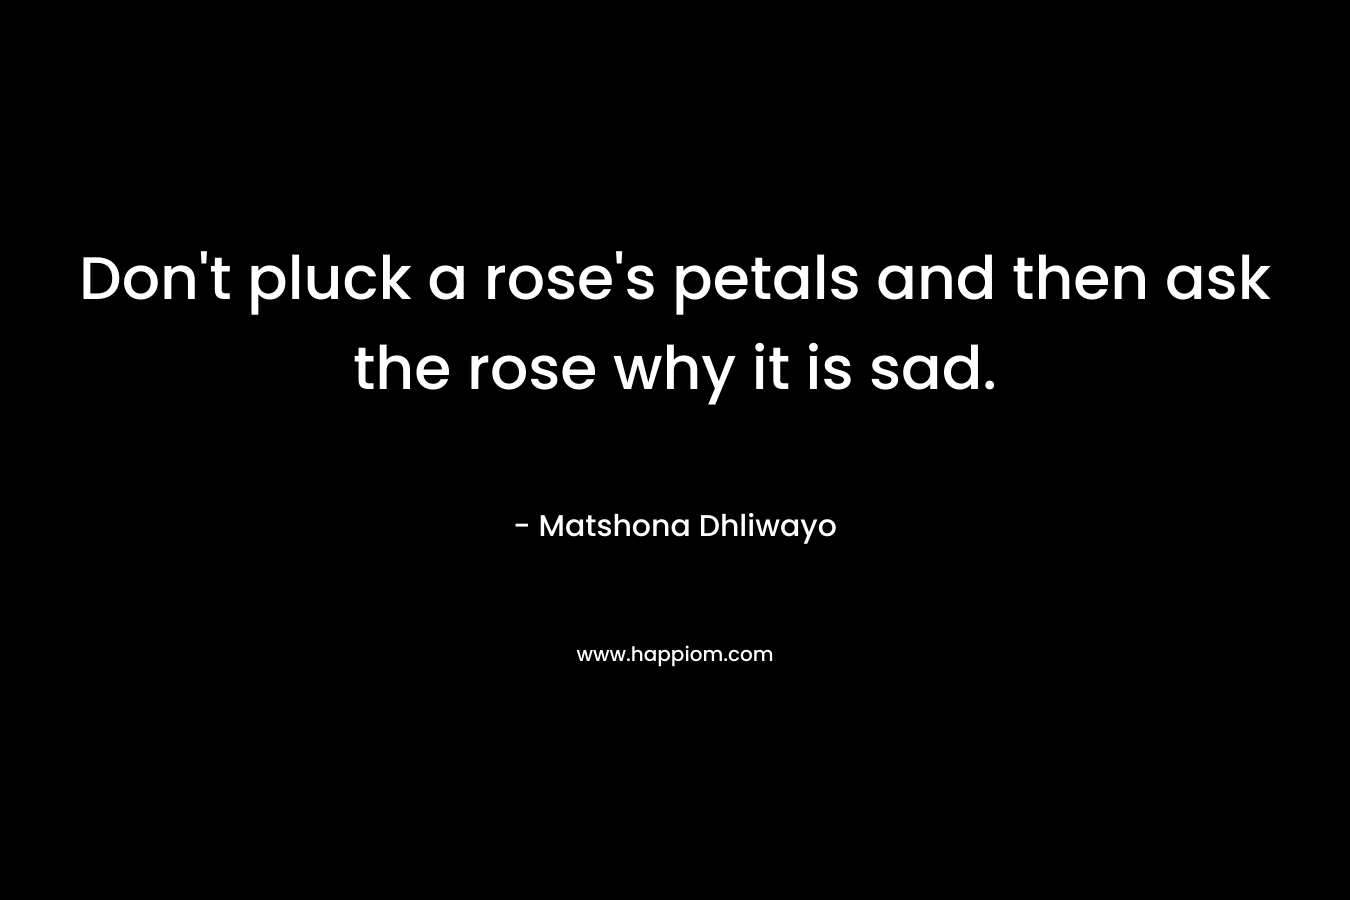 Don't pluck a rose's petals and then ask the rose why it is sad.